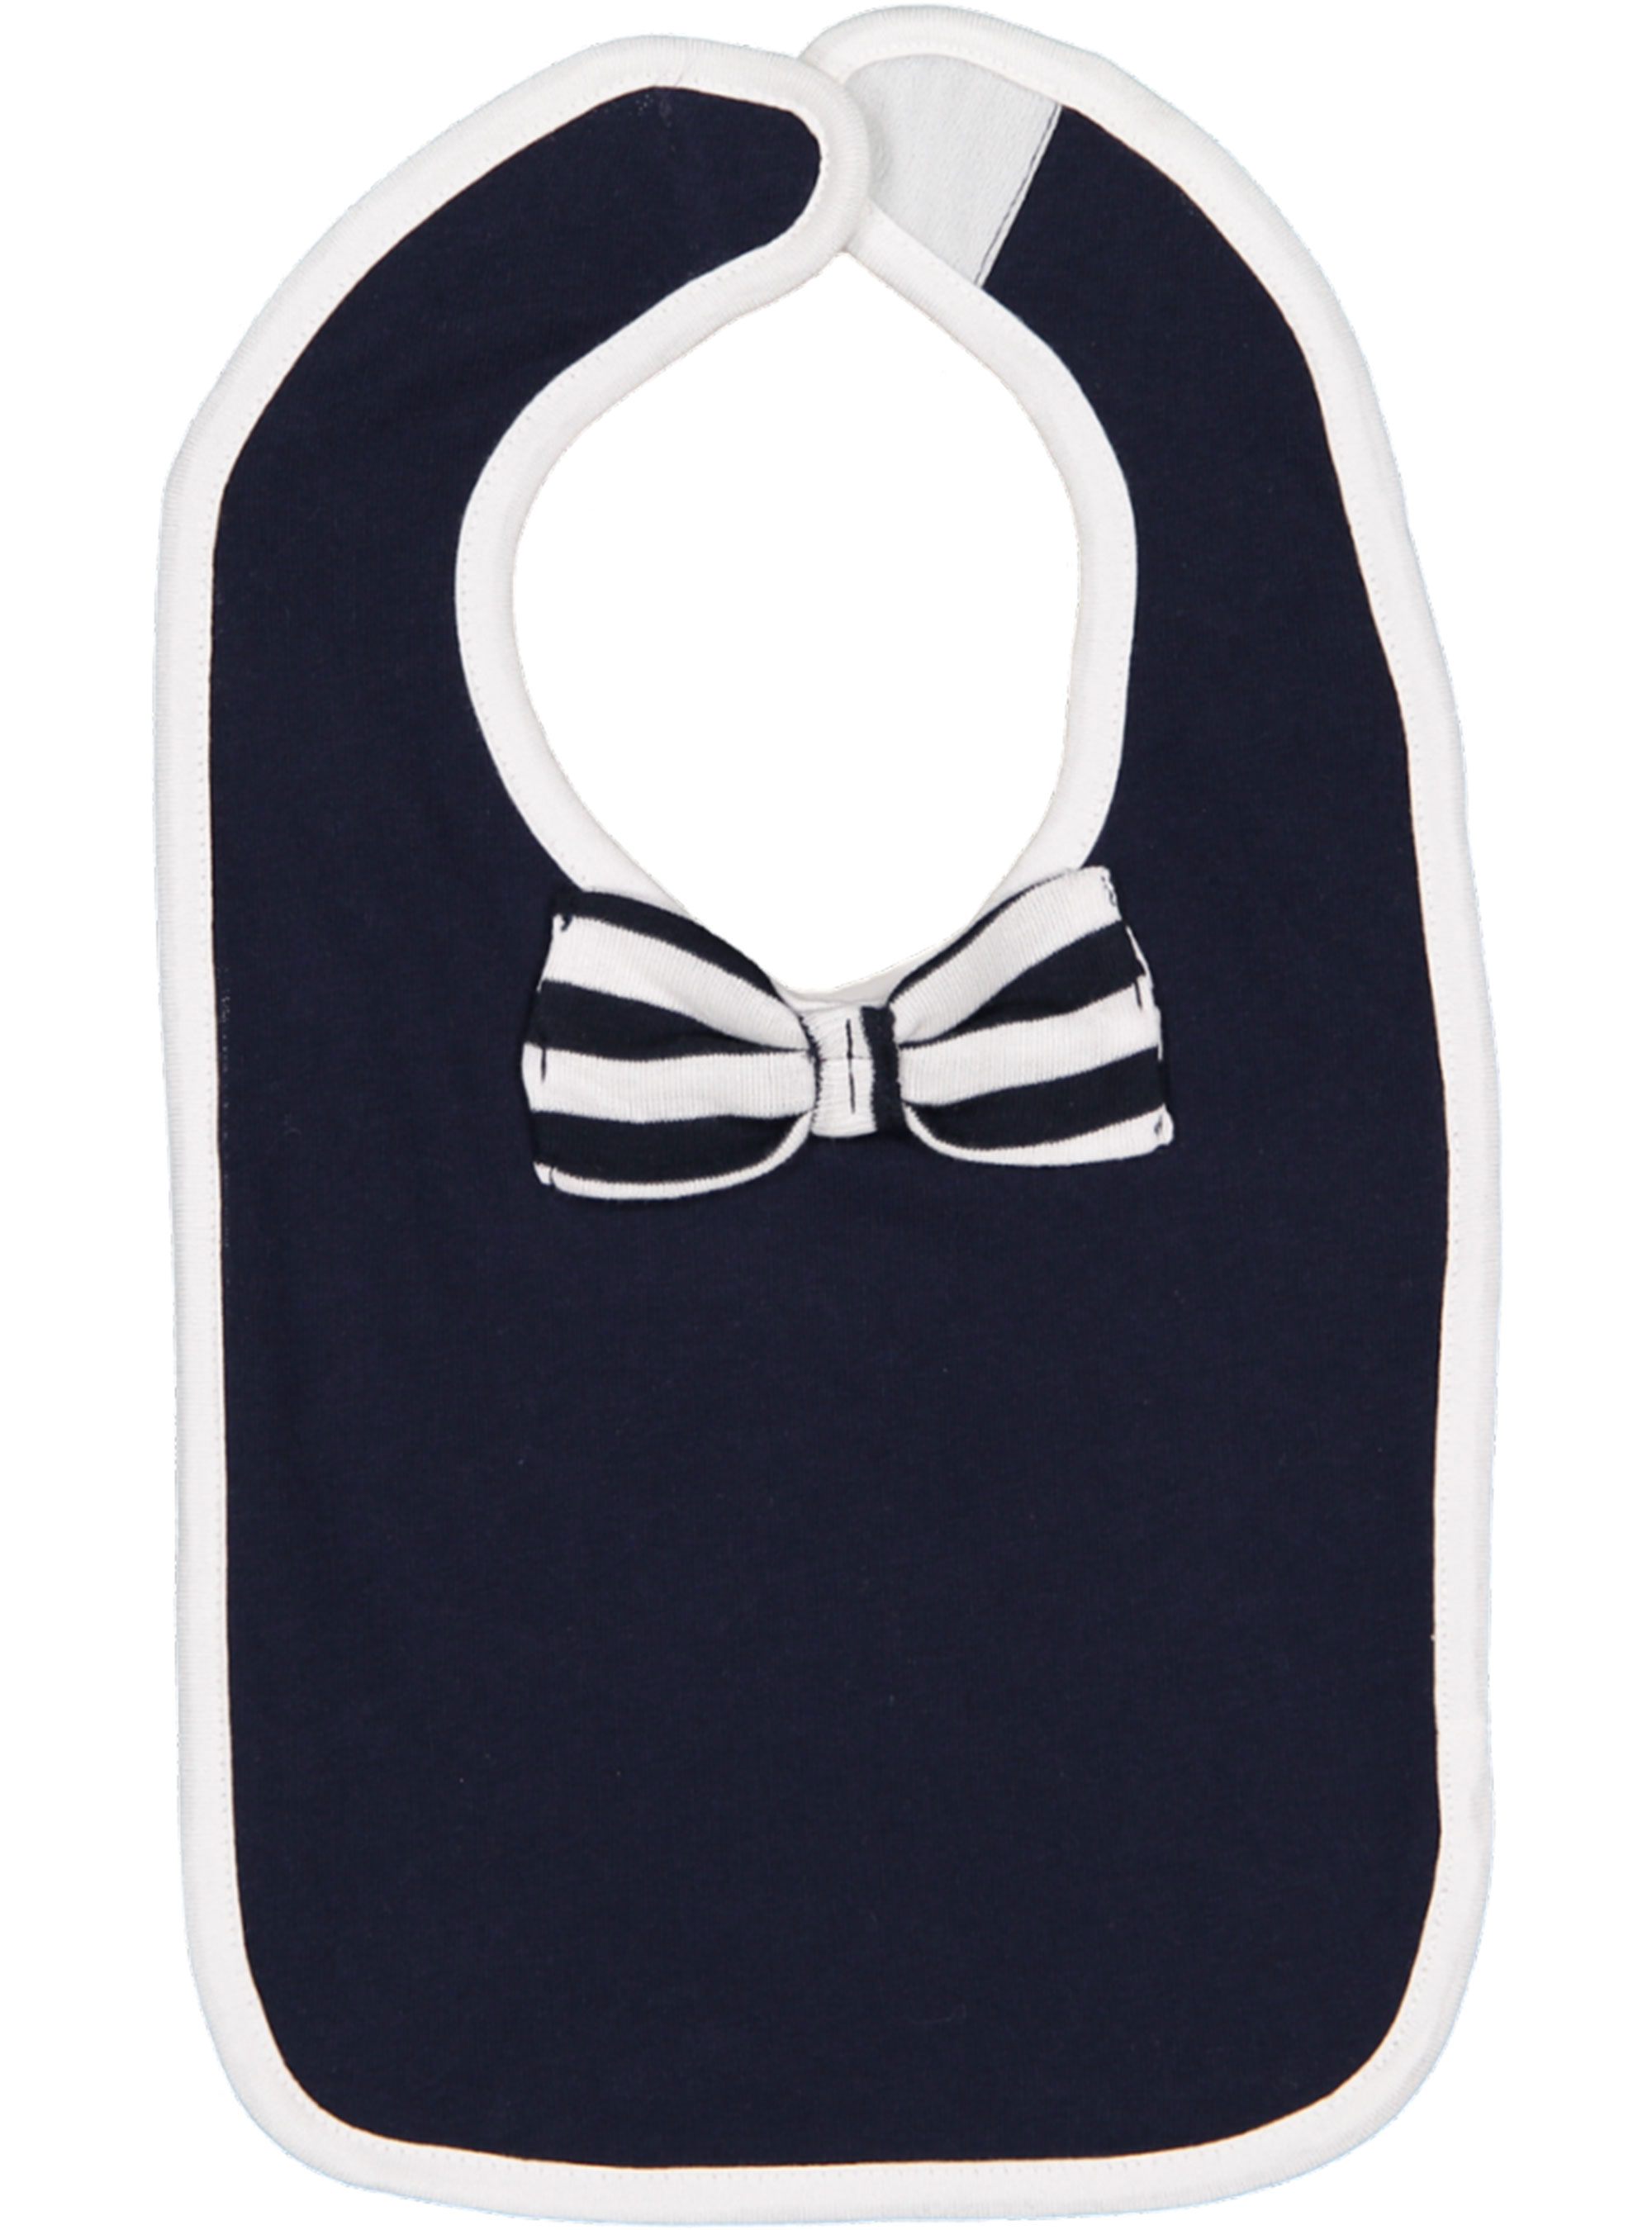 click to view Navy/White